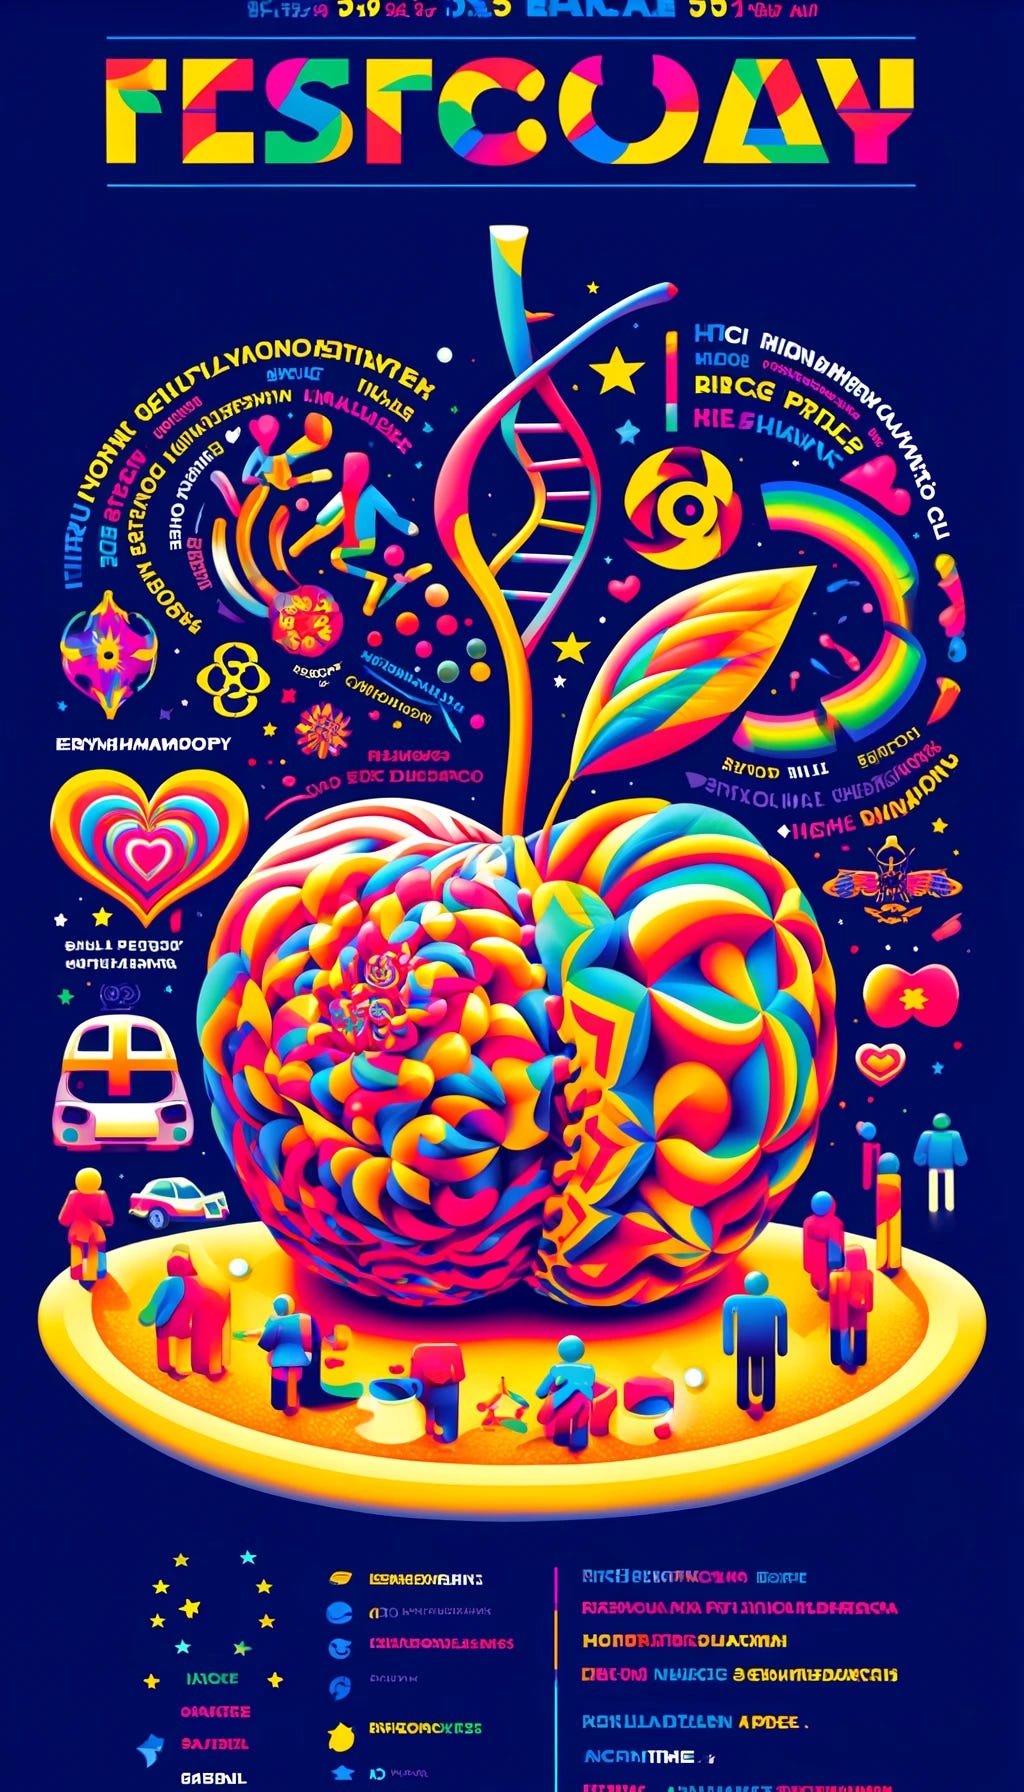 Imagine a visually dynamic and colorful festival poster, moving away from a scientific fair vibe to a more vibrant, celebratory feel while still incorporating distinct symbols for each topic. For genetically modified custard apples, illustrate a brightly colored custard apple with a playful twist of DNA spiraling around it. European governance could be symbolized by a cheerful and abstract representation of the European flag. Bioweapons can be subtly suggested with a stylish, less ominous biohazard symbol merged with floral or natural motifs. Psychopharmacology & psychotherapy could be represented by a serene face with half brain, half nature imagery. Love and relationships could be depicted through abstract, colorful heart shapes interlocking. Quantitative models of social groups might be visualized as a network of glowing, interconnected points. Personal protective equipment should be shown in an exaggerated, cartoonish pile to denote the 'too much information' aspect. The inclusion of indigenous communities in longtermist philosophy can be symbolized by a harmonious blend of traditional patterns circling a futuristic globe. Infohazards could be hinted at with a discreet, intriguing 'question mark' sign nestled among other symbols. Title the poster 'A Tapestry of Ideas: Unveiling the Wonders of Tomorrow's Festival'. The design should be playful, engaging, and inviting, with a rich palette of colors to draw the eye and stimulate curiosity about the depth and breadth of topics.